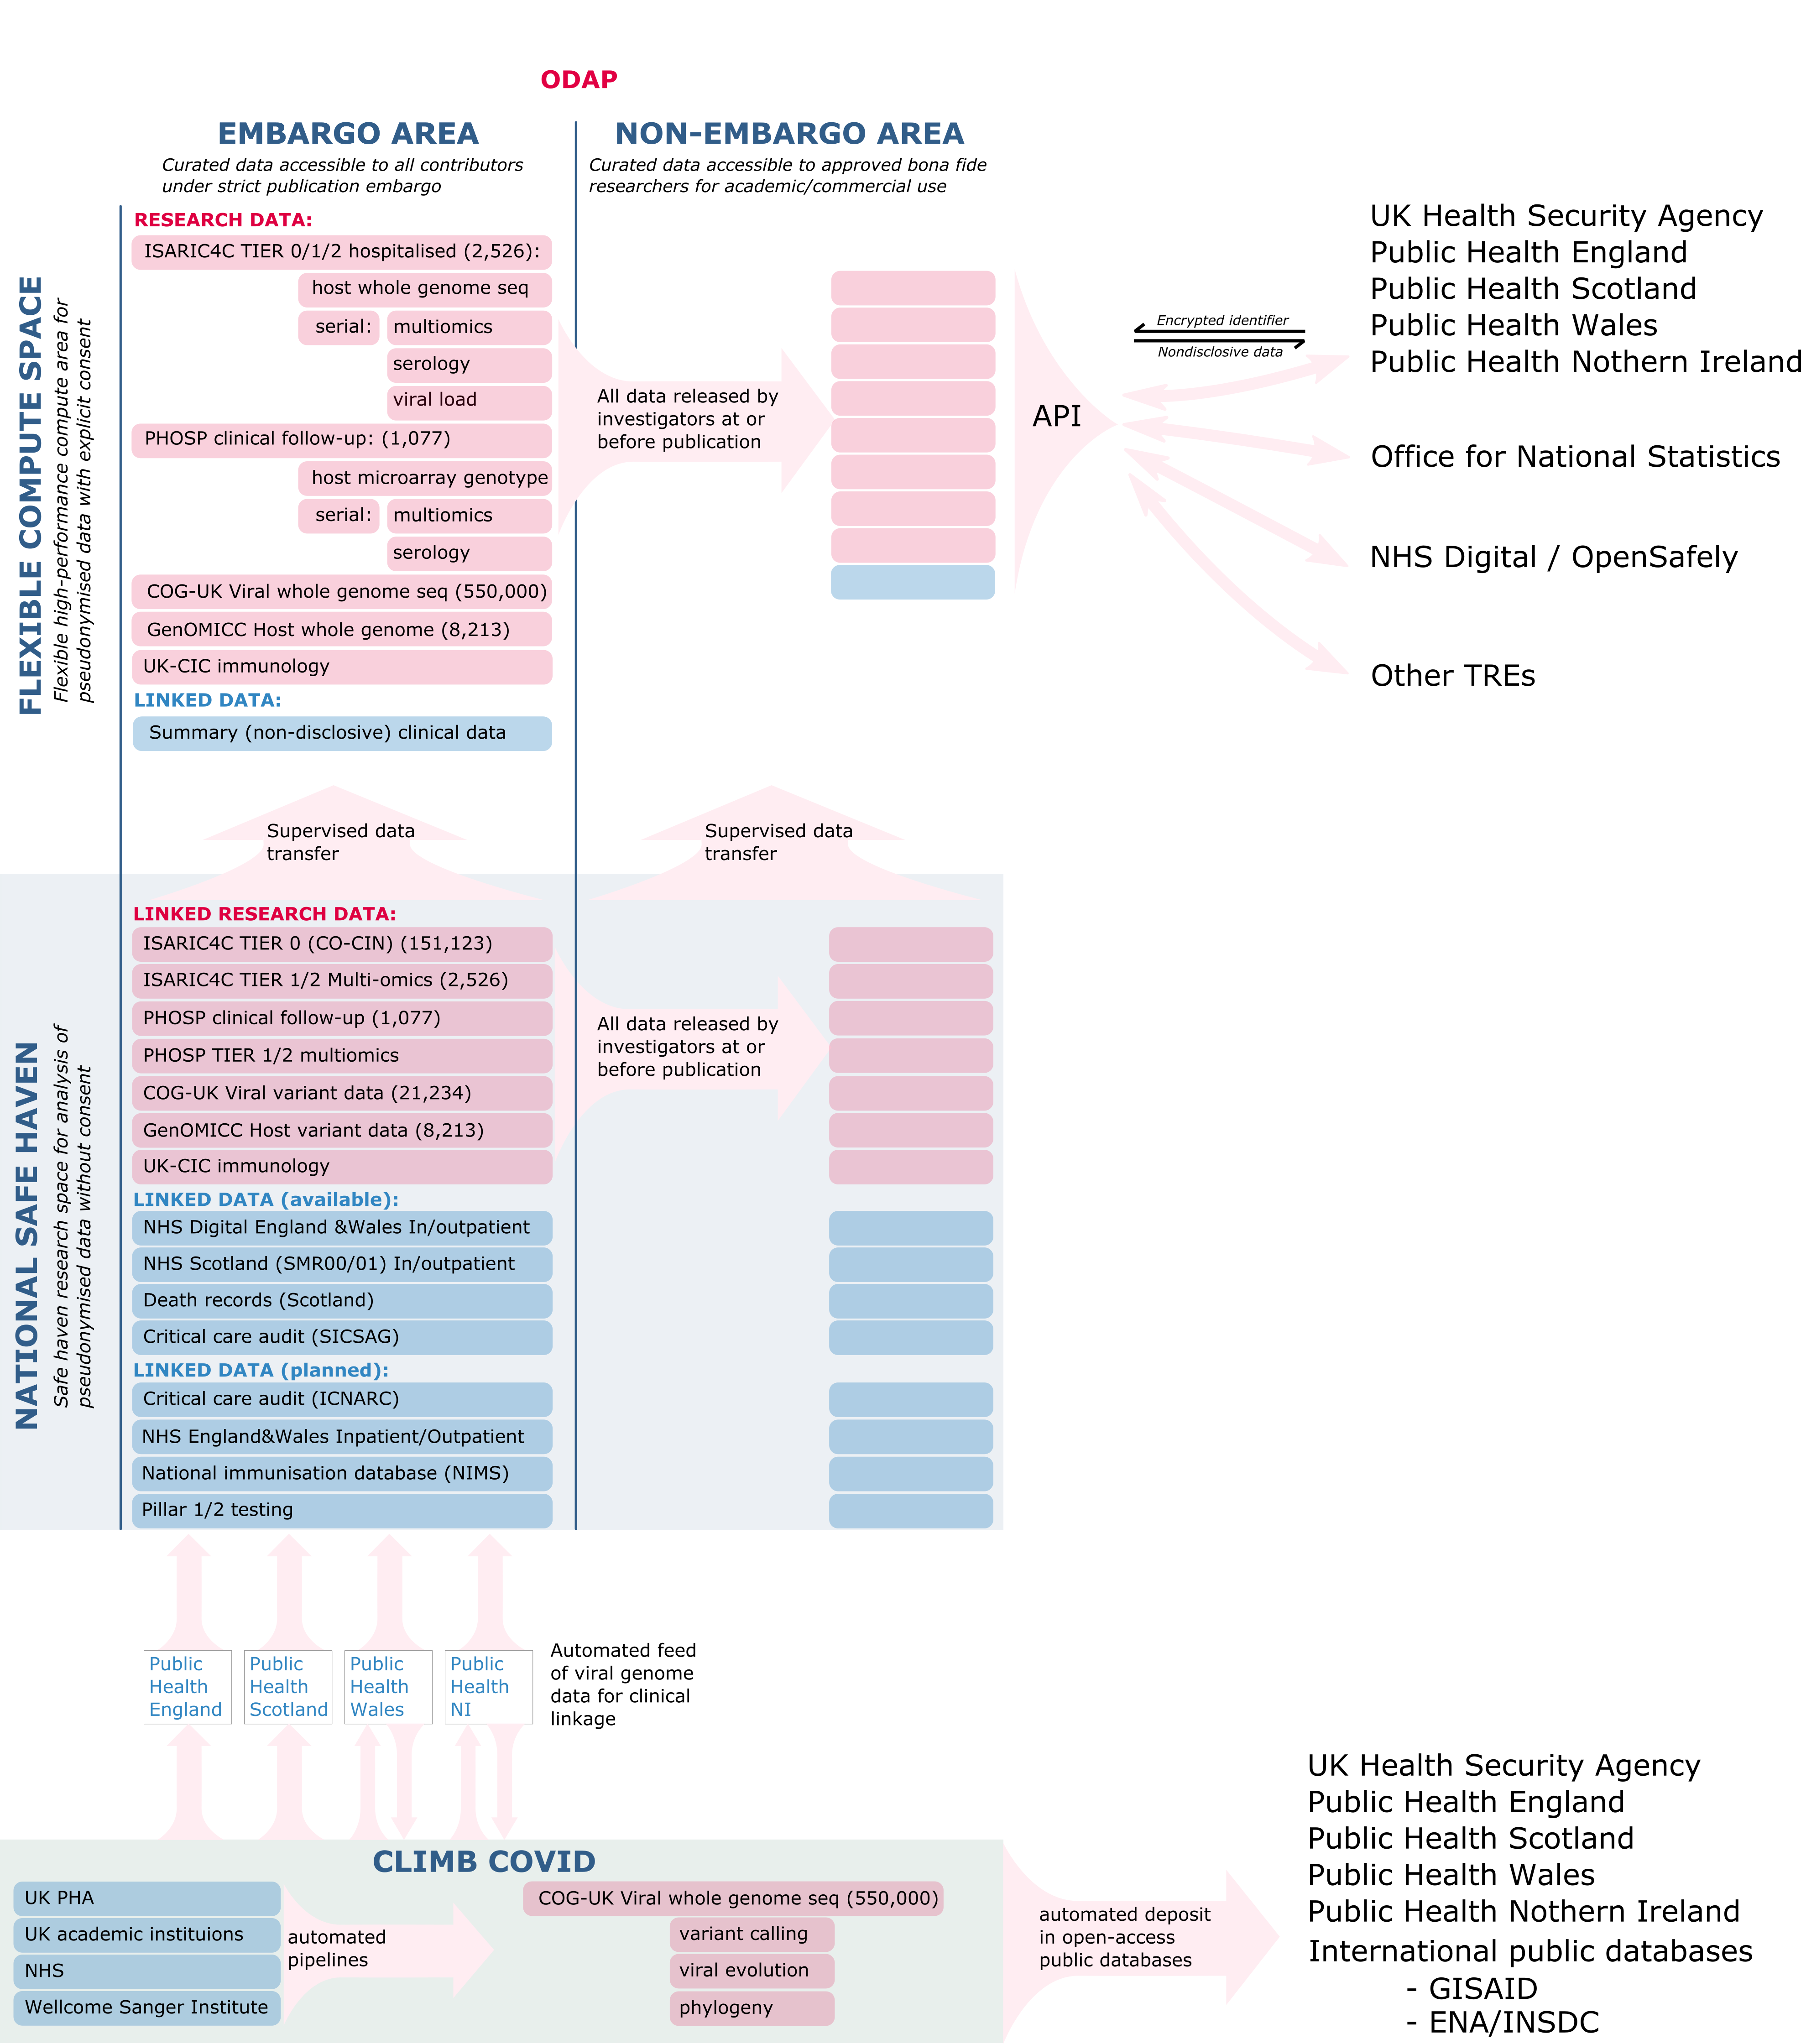 Figure 1: Structure of the Outbreak Analysis Platform